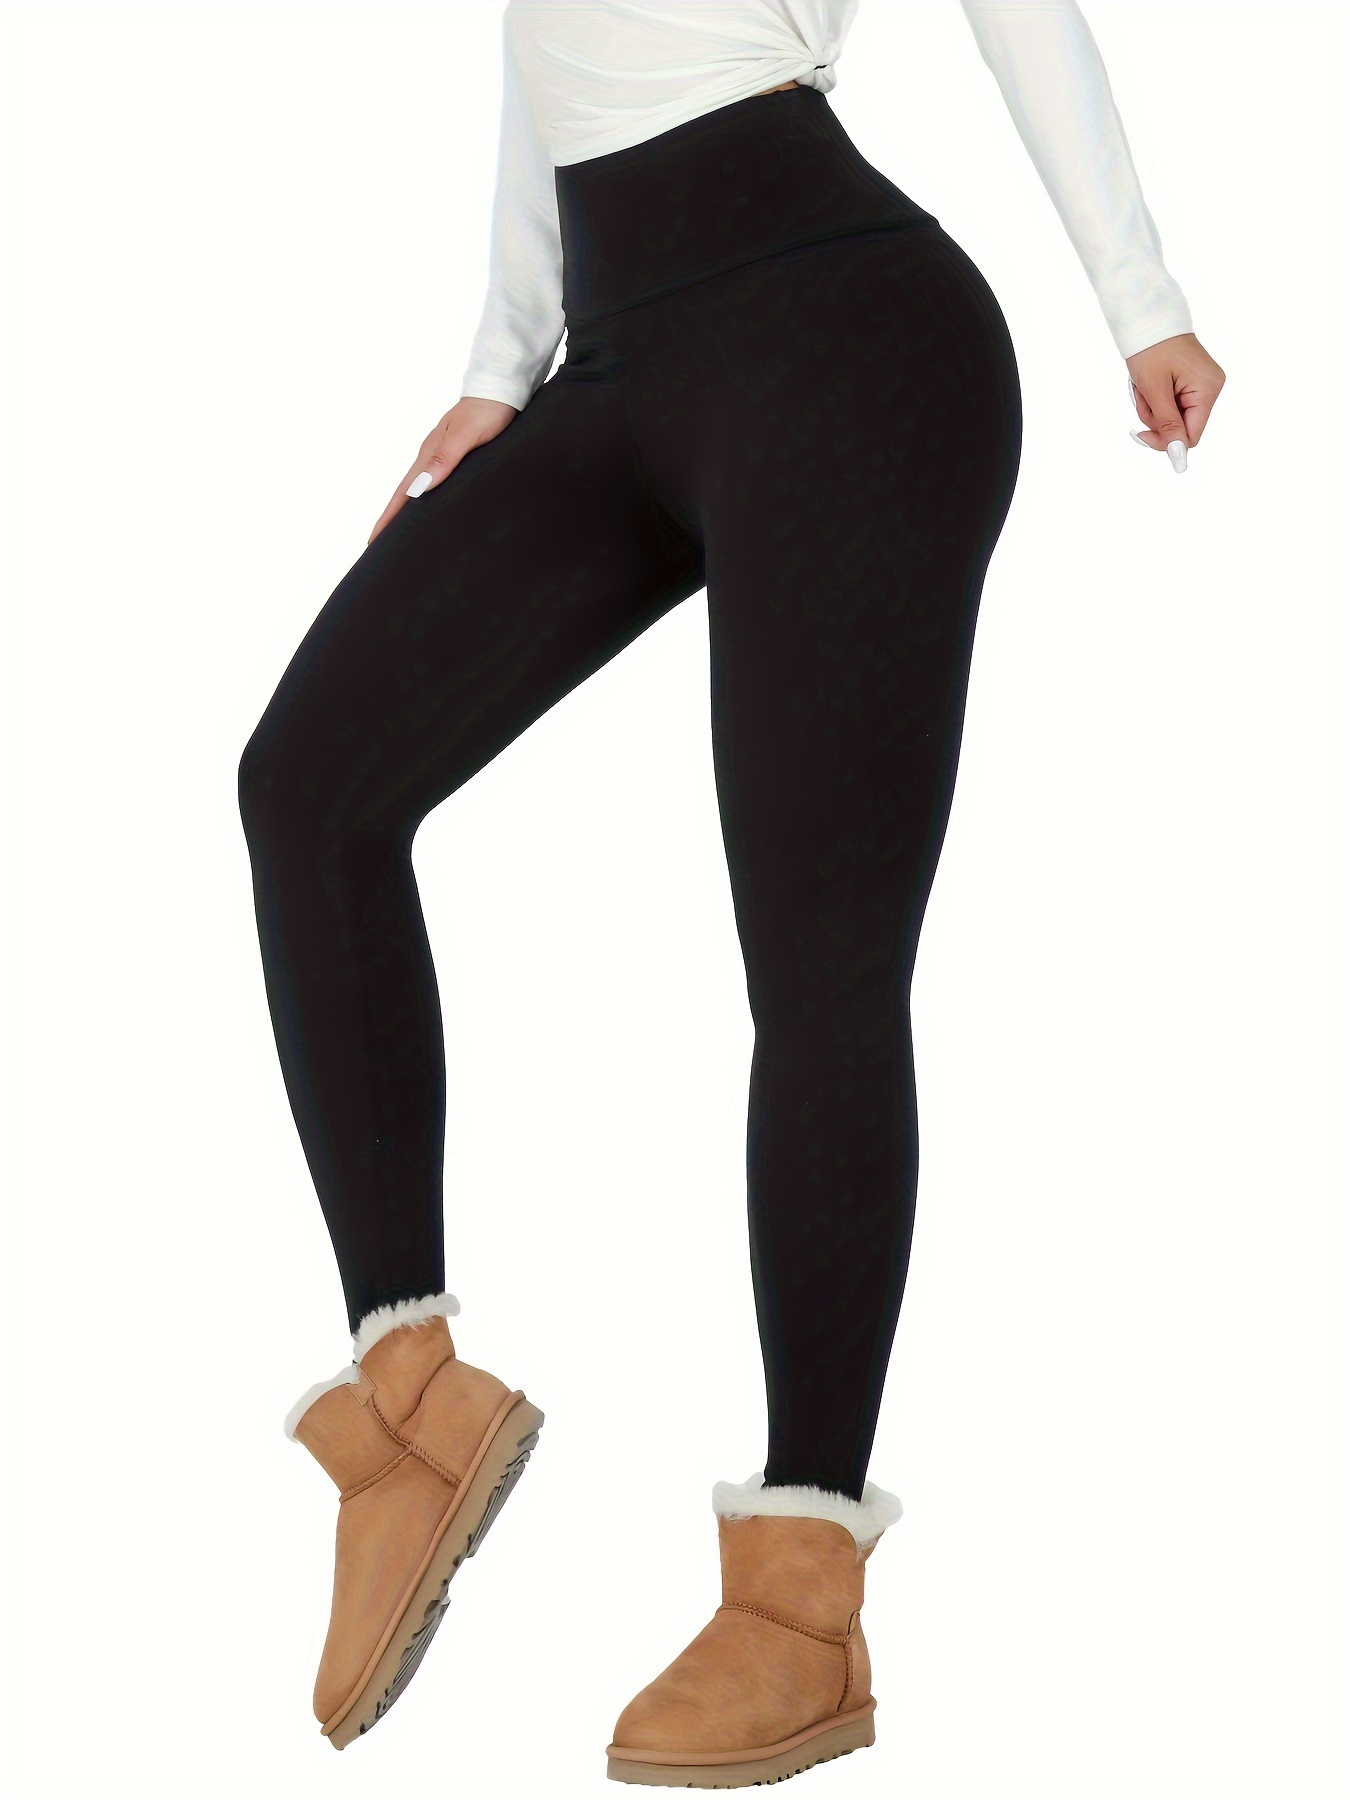 Women's Fleece Lined Leggings Winter High Waisted Soft Stretch Thermal Warm  Workout Yoga Pants S-2xl-mxbc